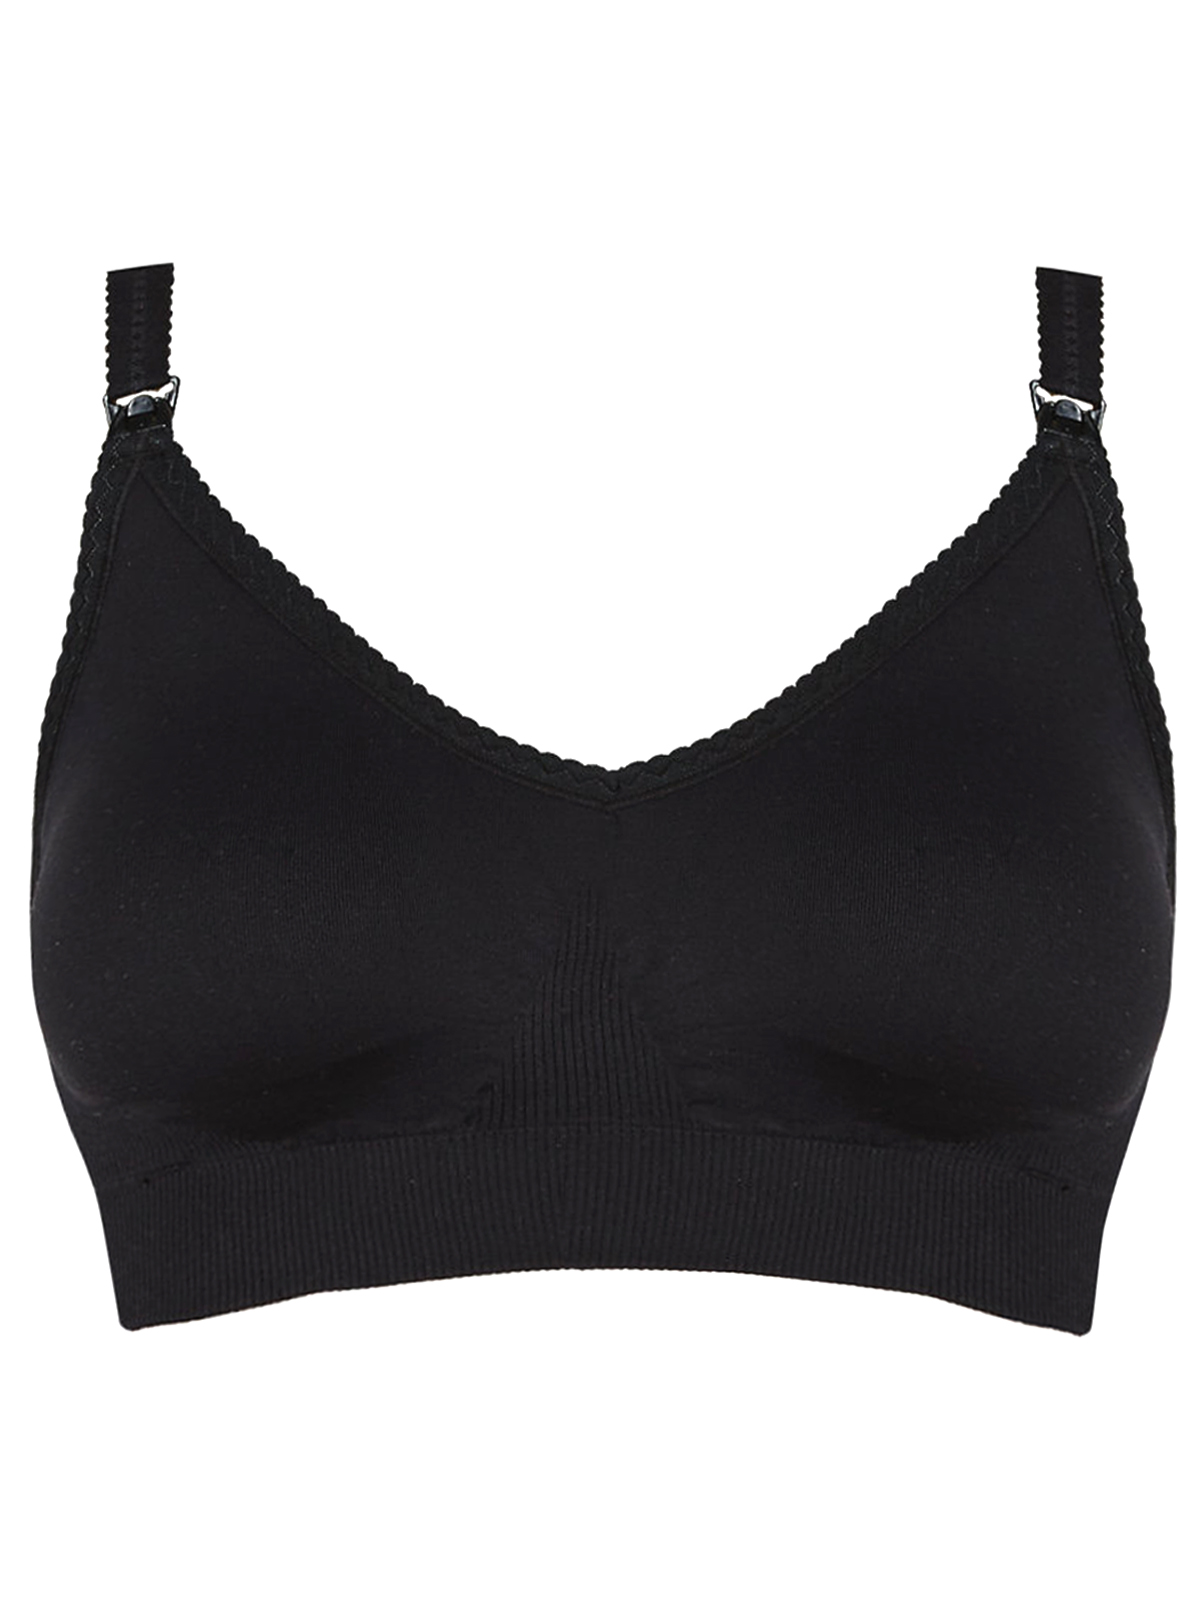 Marks and Spencer - - M&5 BLACK Maternity Seamfree Padded Full Cup Bra